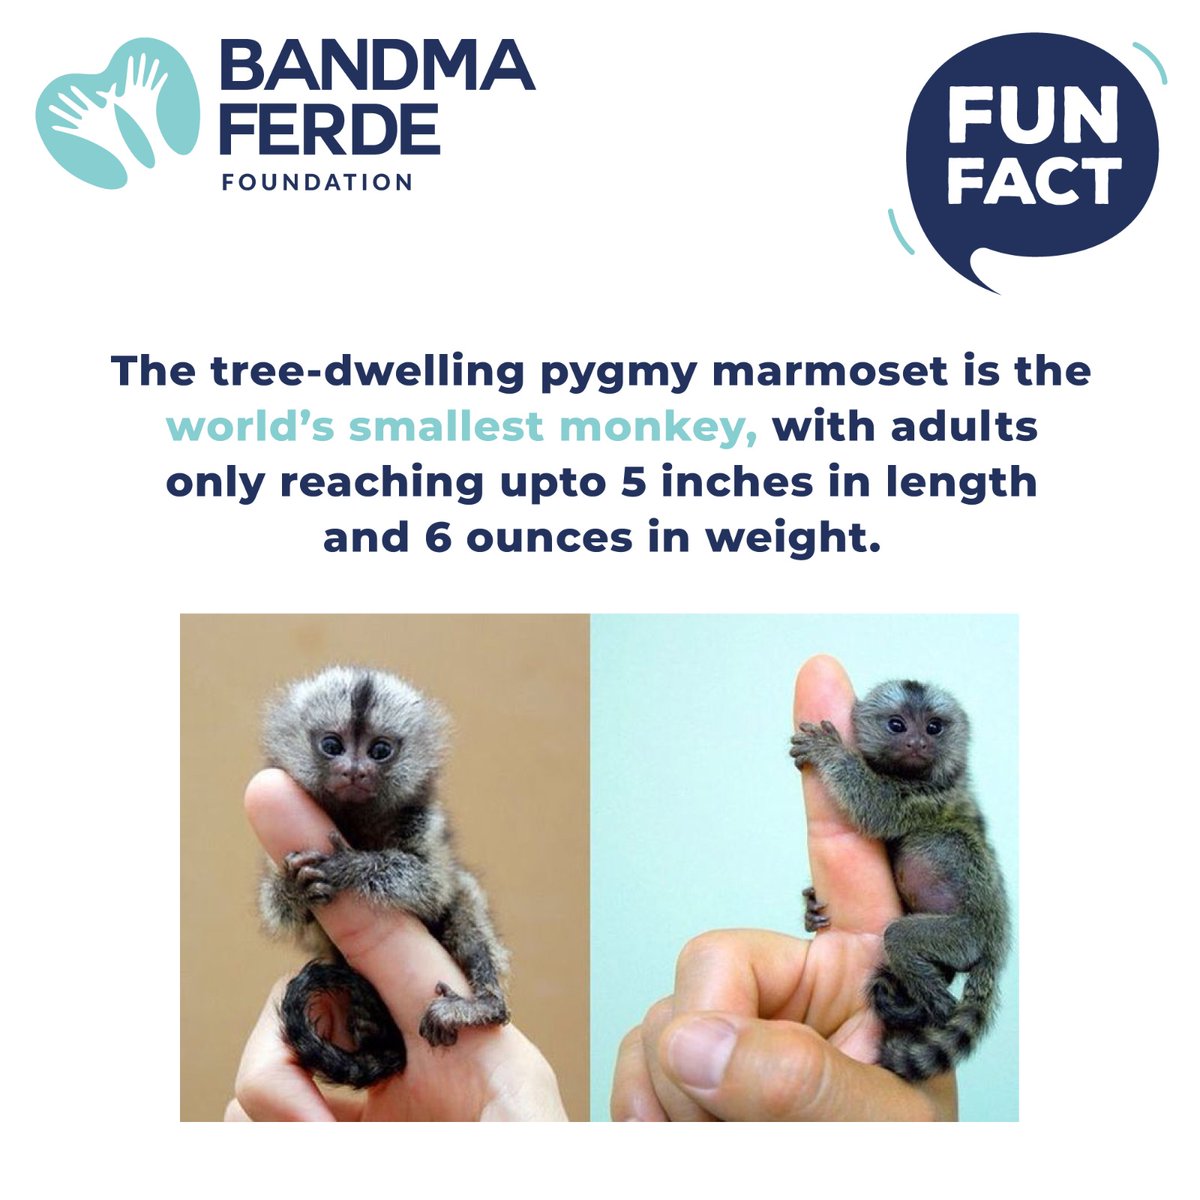 𝐅𝐮𝐧 𝐅𝐚𝐜𝐭: The tree-dwelling pygmy marmoset is the world's smallest monkey, with adults only reaching upto 5 inches in length and 6 ounces in weight. For more information visit the link: linktr.ee/Bandmaferdefou… #Bandmaferdefoundation #Bandmaferde #NGOIndia